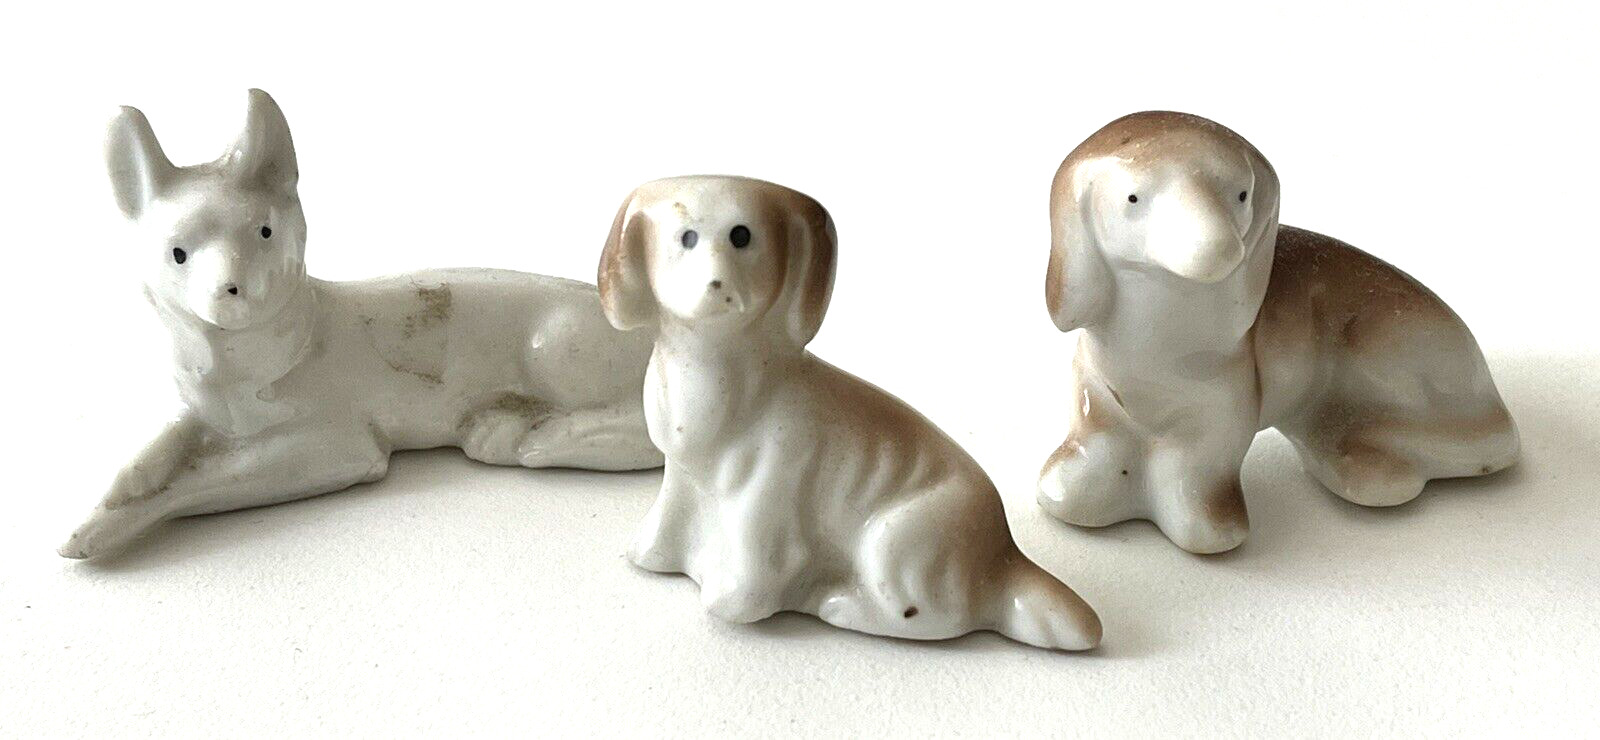 3 Vintage Miniature Porcelain Dog Figurines White & Tan Marked Made in Japan